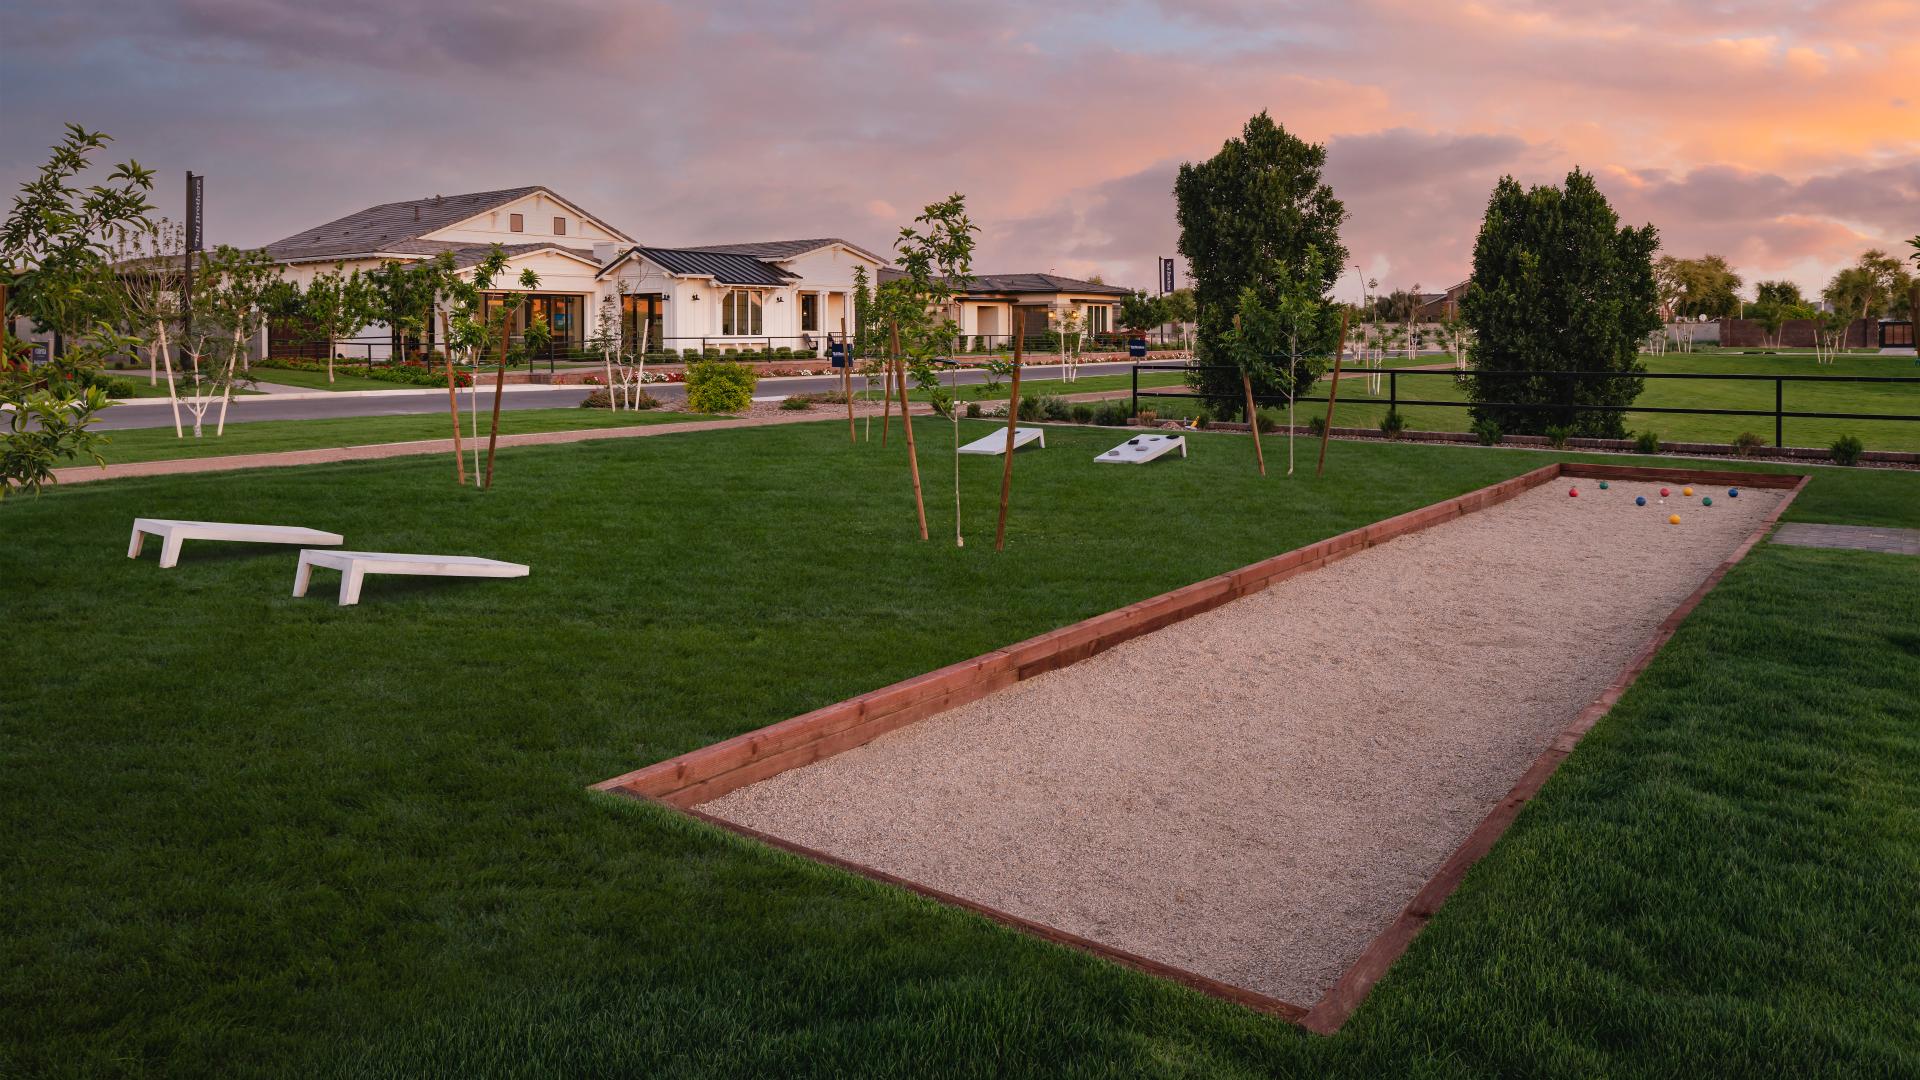 Community bocce ball court and corn hole